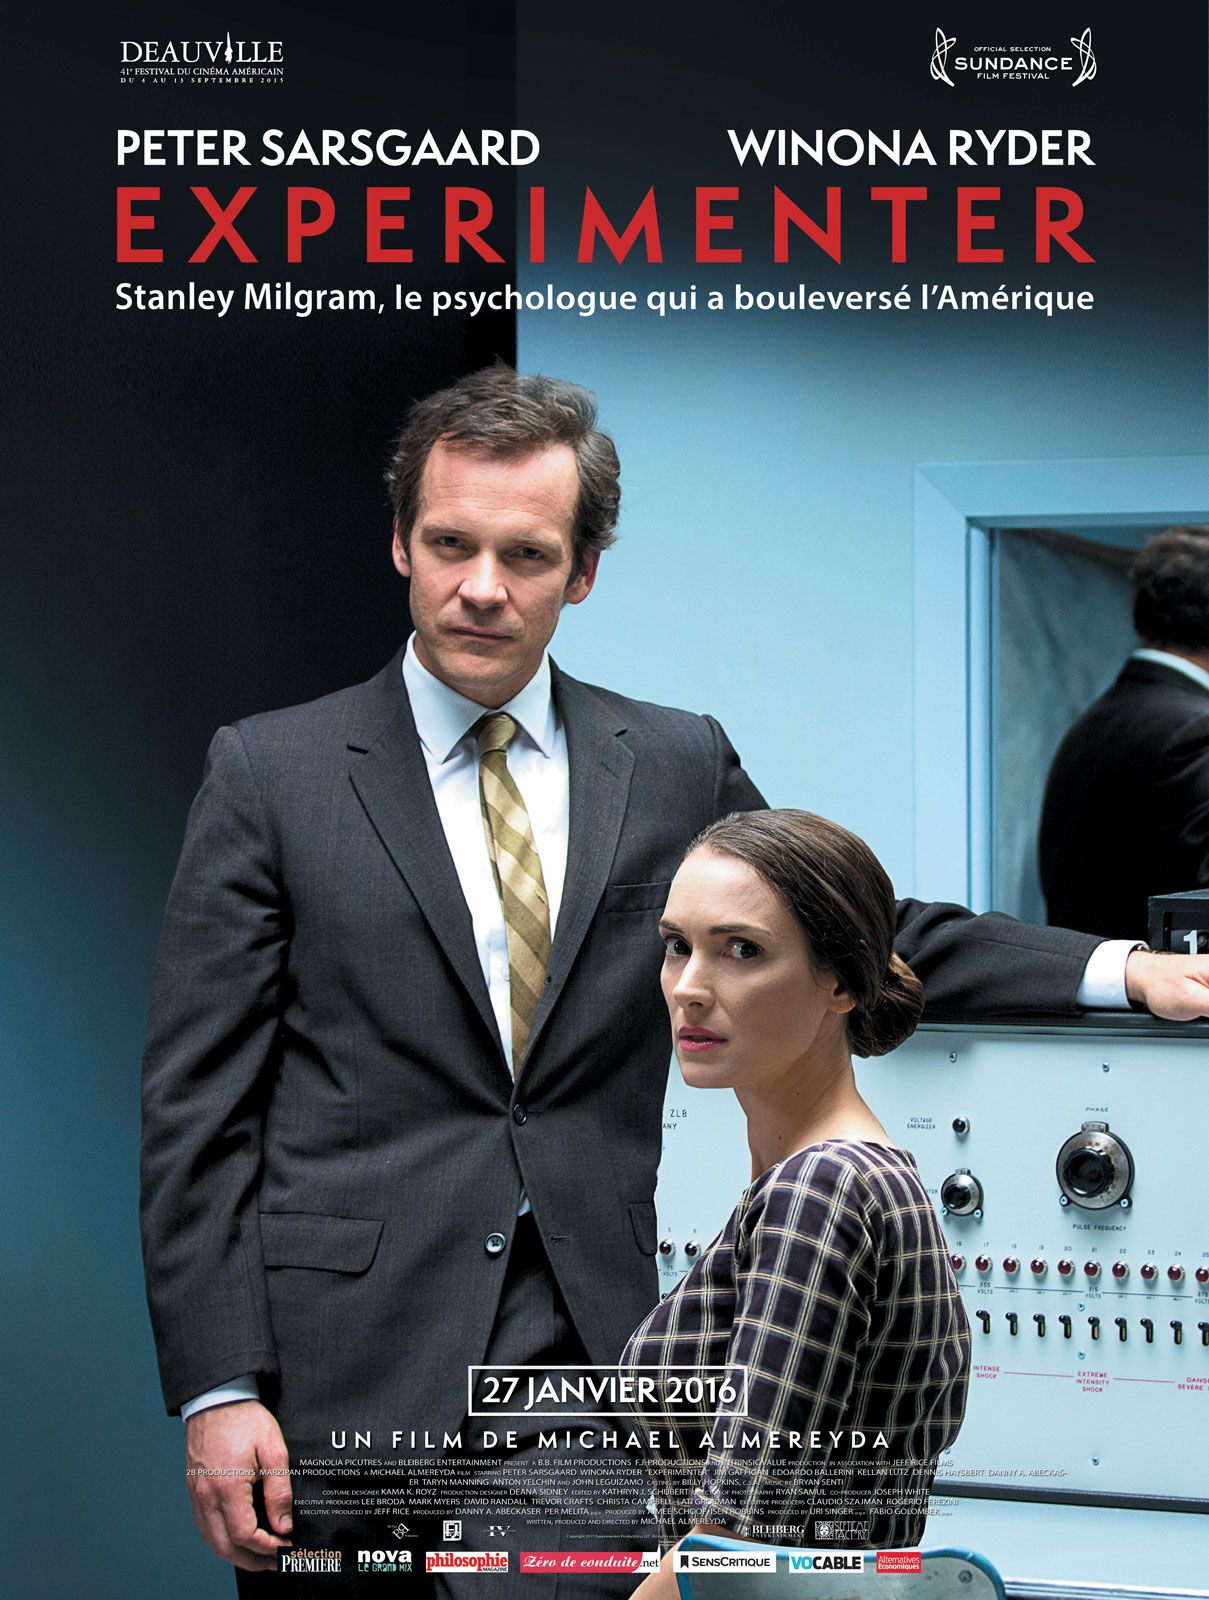 Experimenter - Film (2016) streaming VF gratuit complet